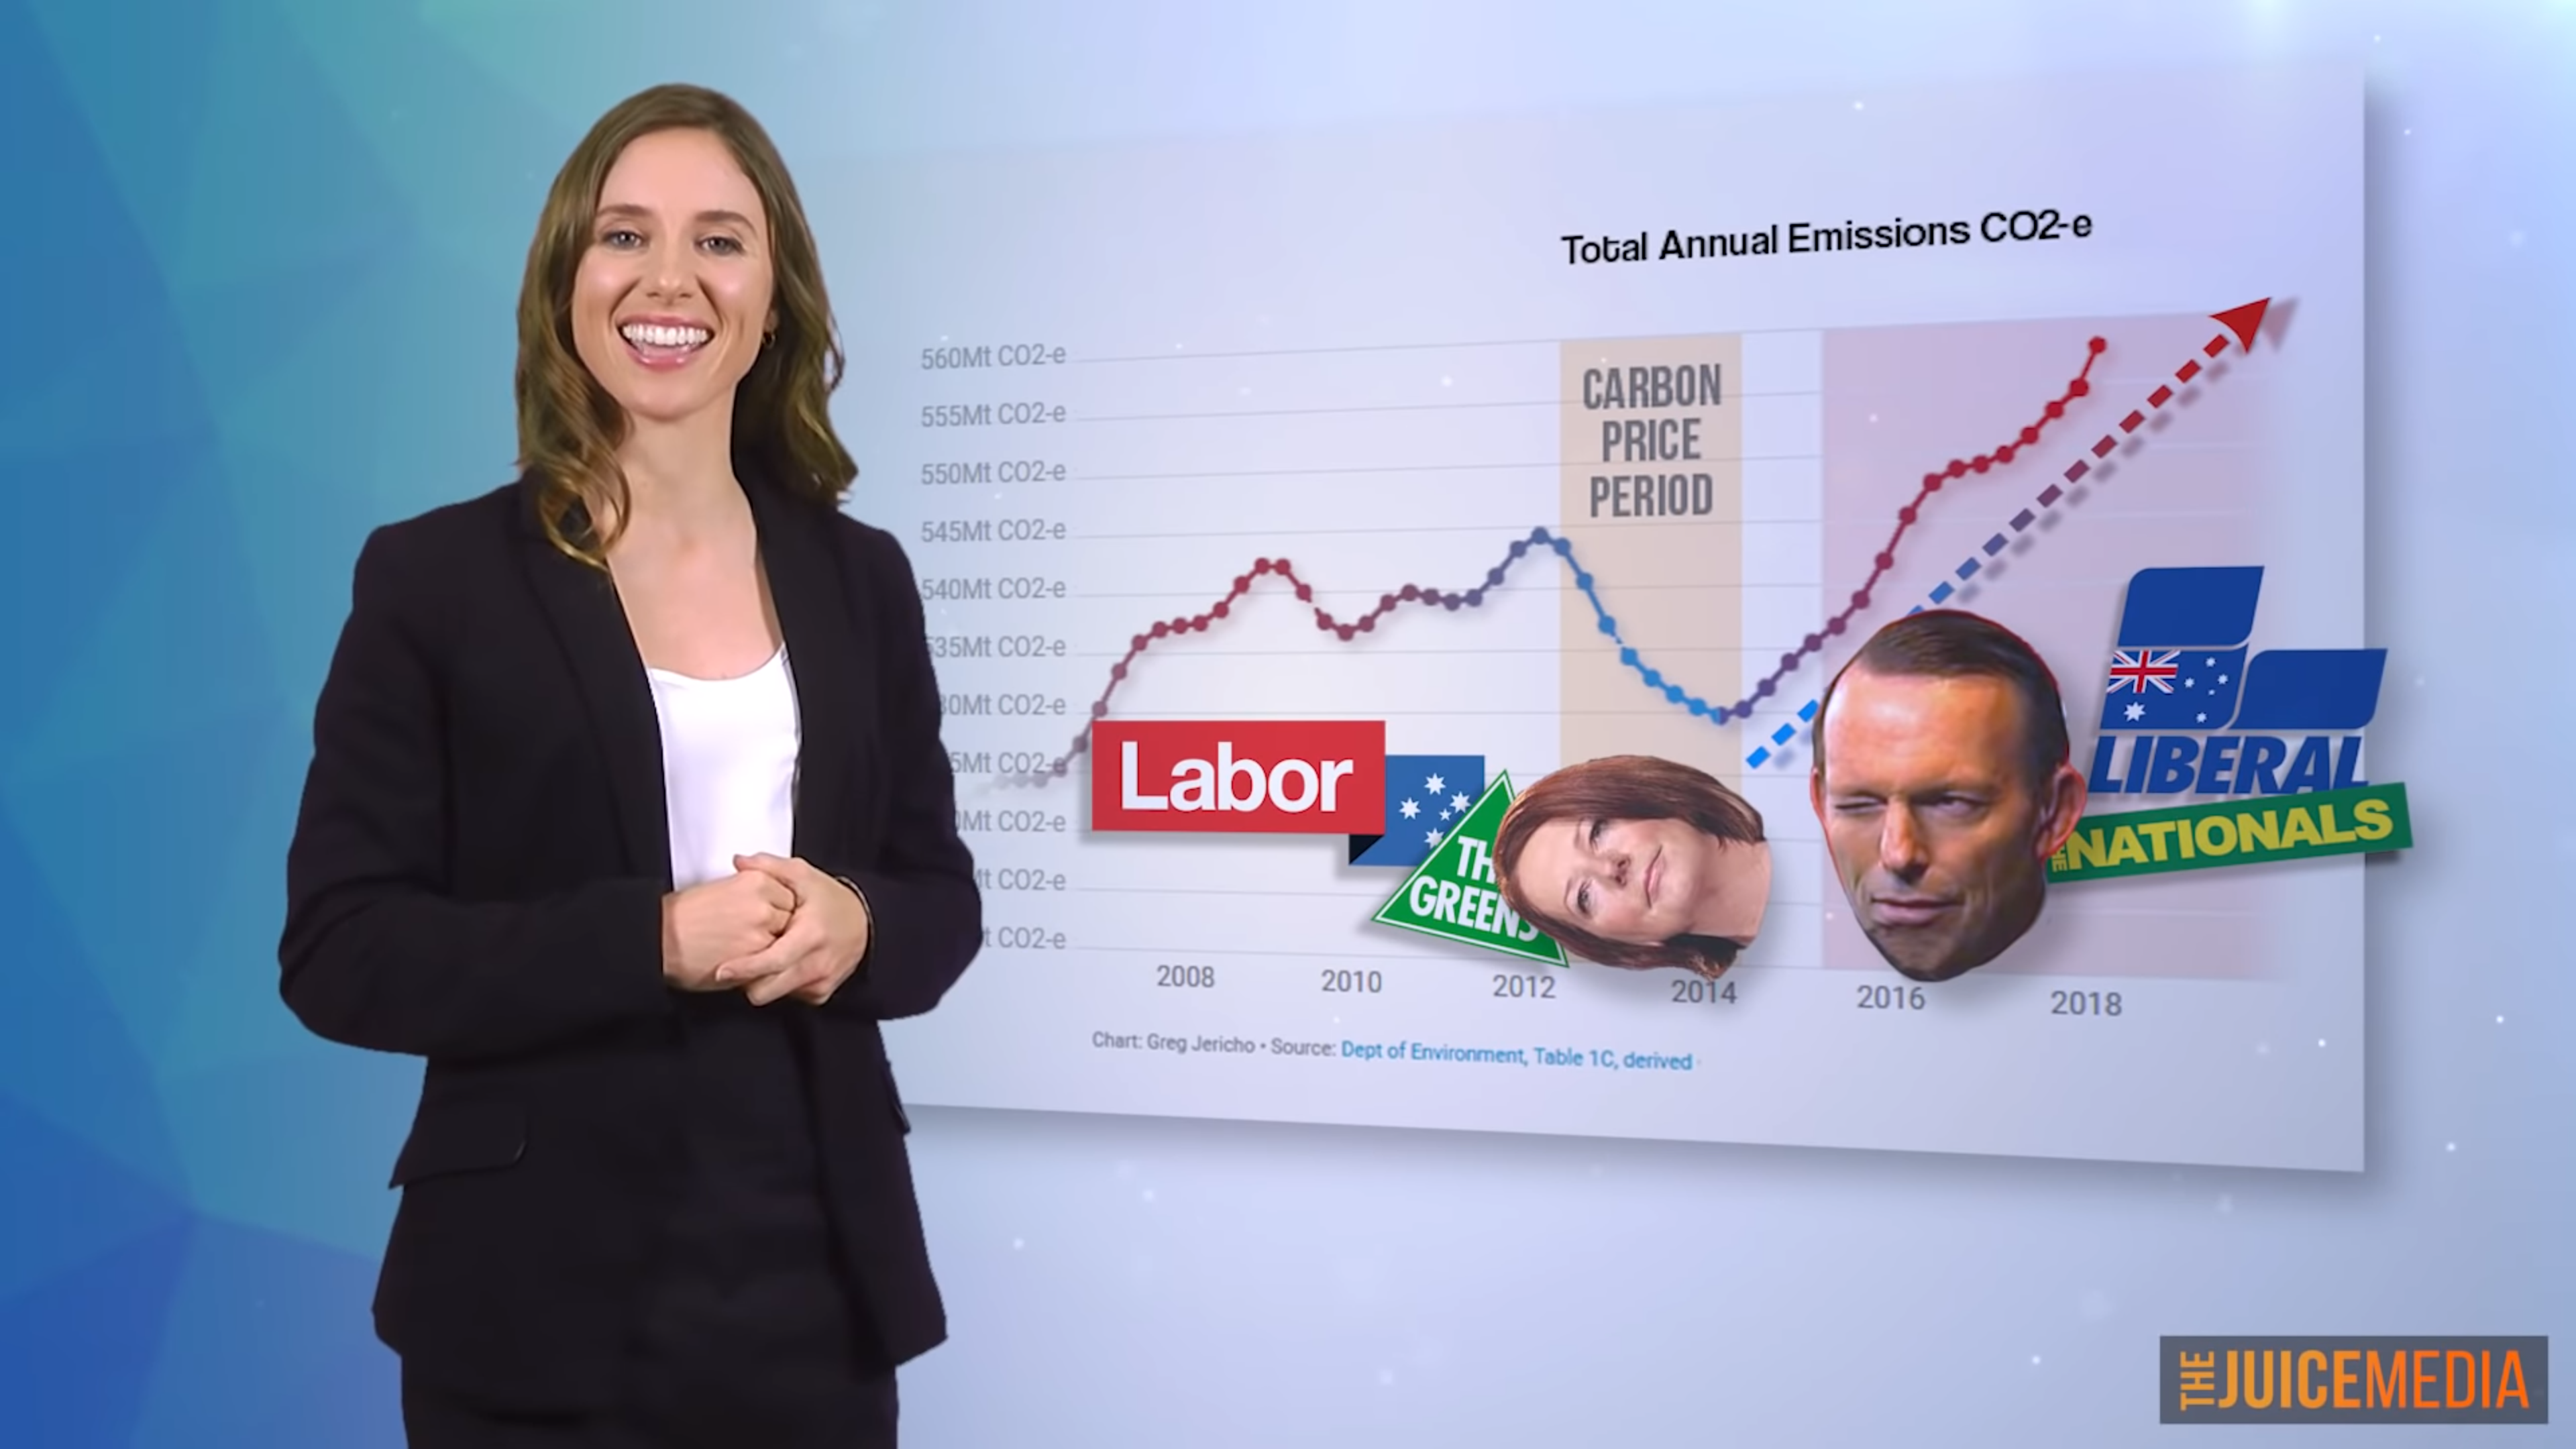 Total Annual CO2-e emissions in Australia during the Labor and Liberal governments. Photo: The Juice Media